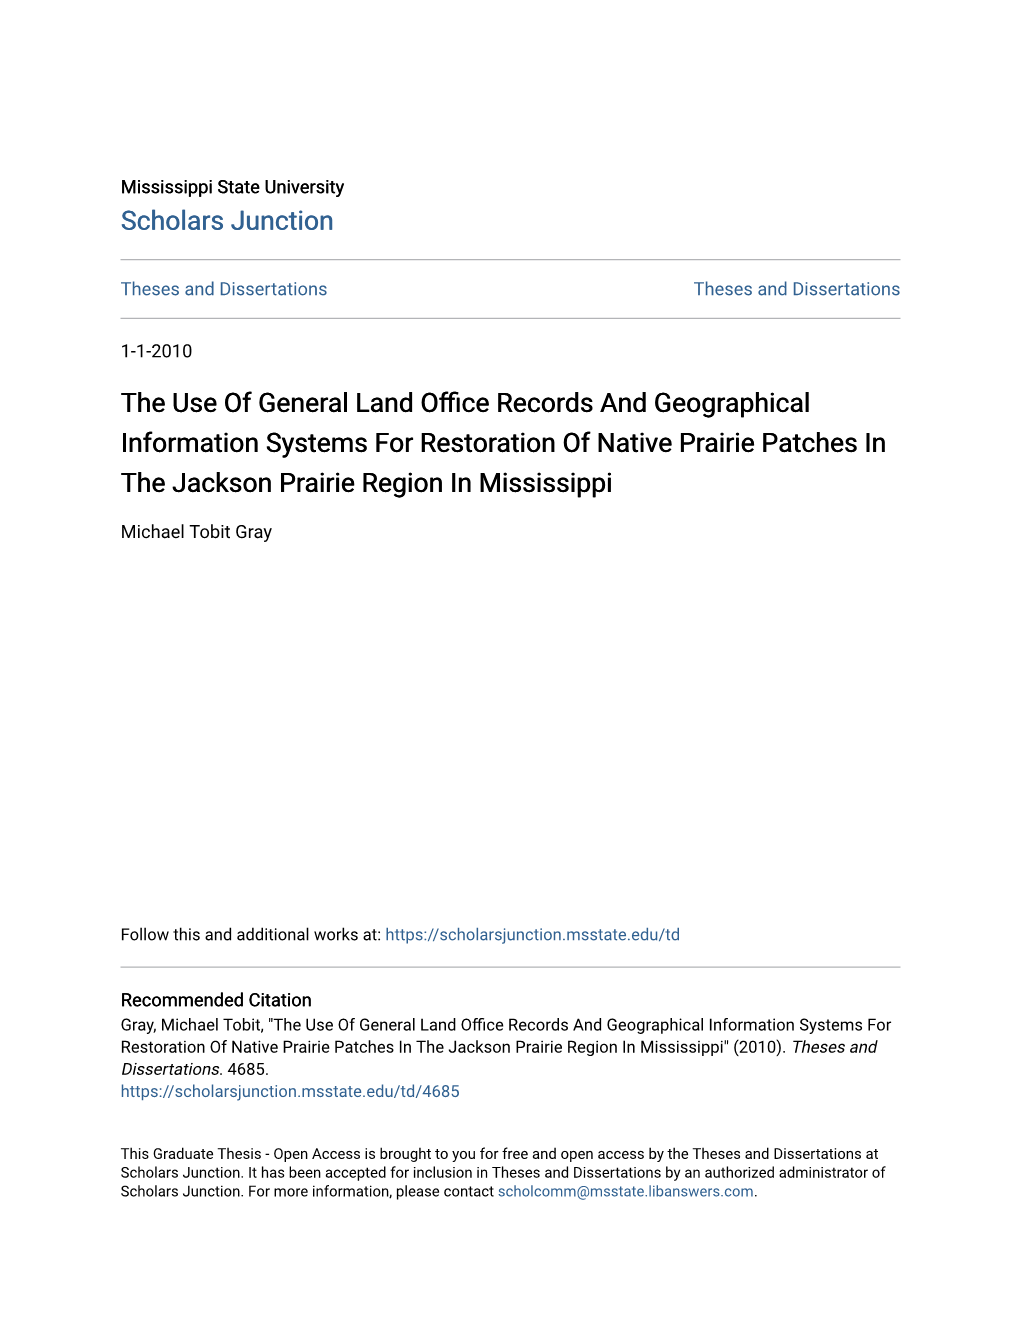 The Use of General Land Office Records and Geographical Information Systems for Restoration of Native Prairie Patches in the Jackson Prairie Region in Mississippi